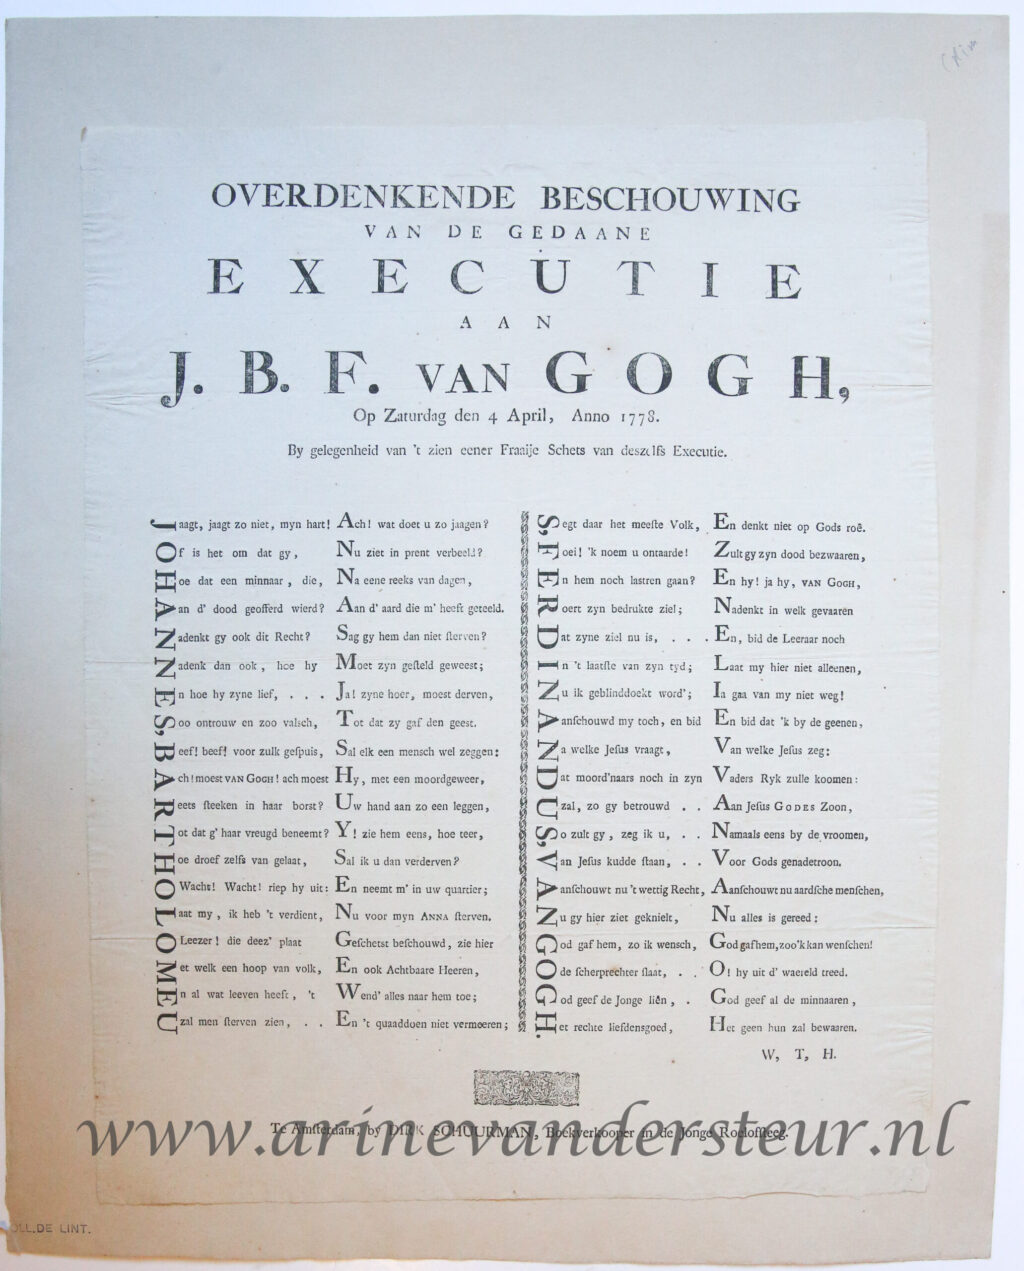 [Antique prints, engravings and pamphlet] Print and Announcement of the execution of J.B.F. van Gogh, on Saturday 4 April 1778.